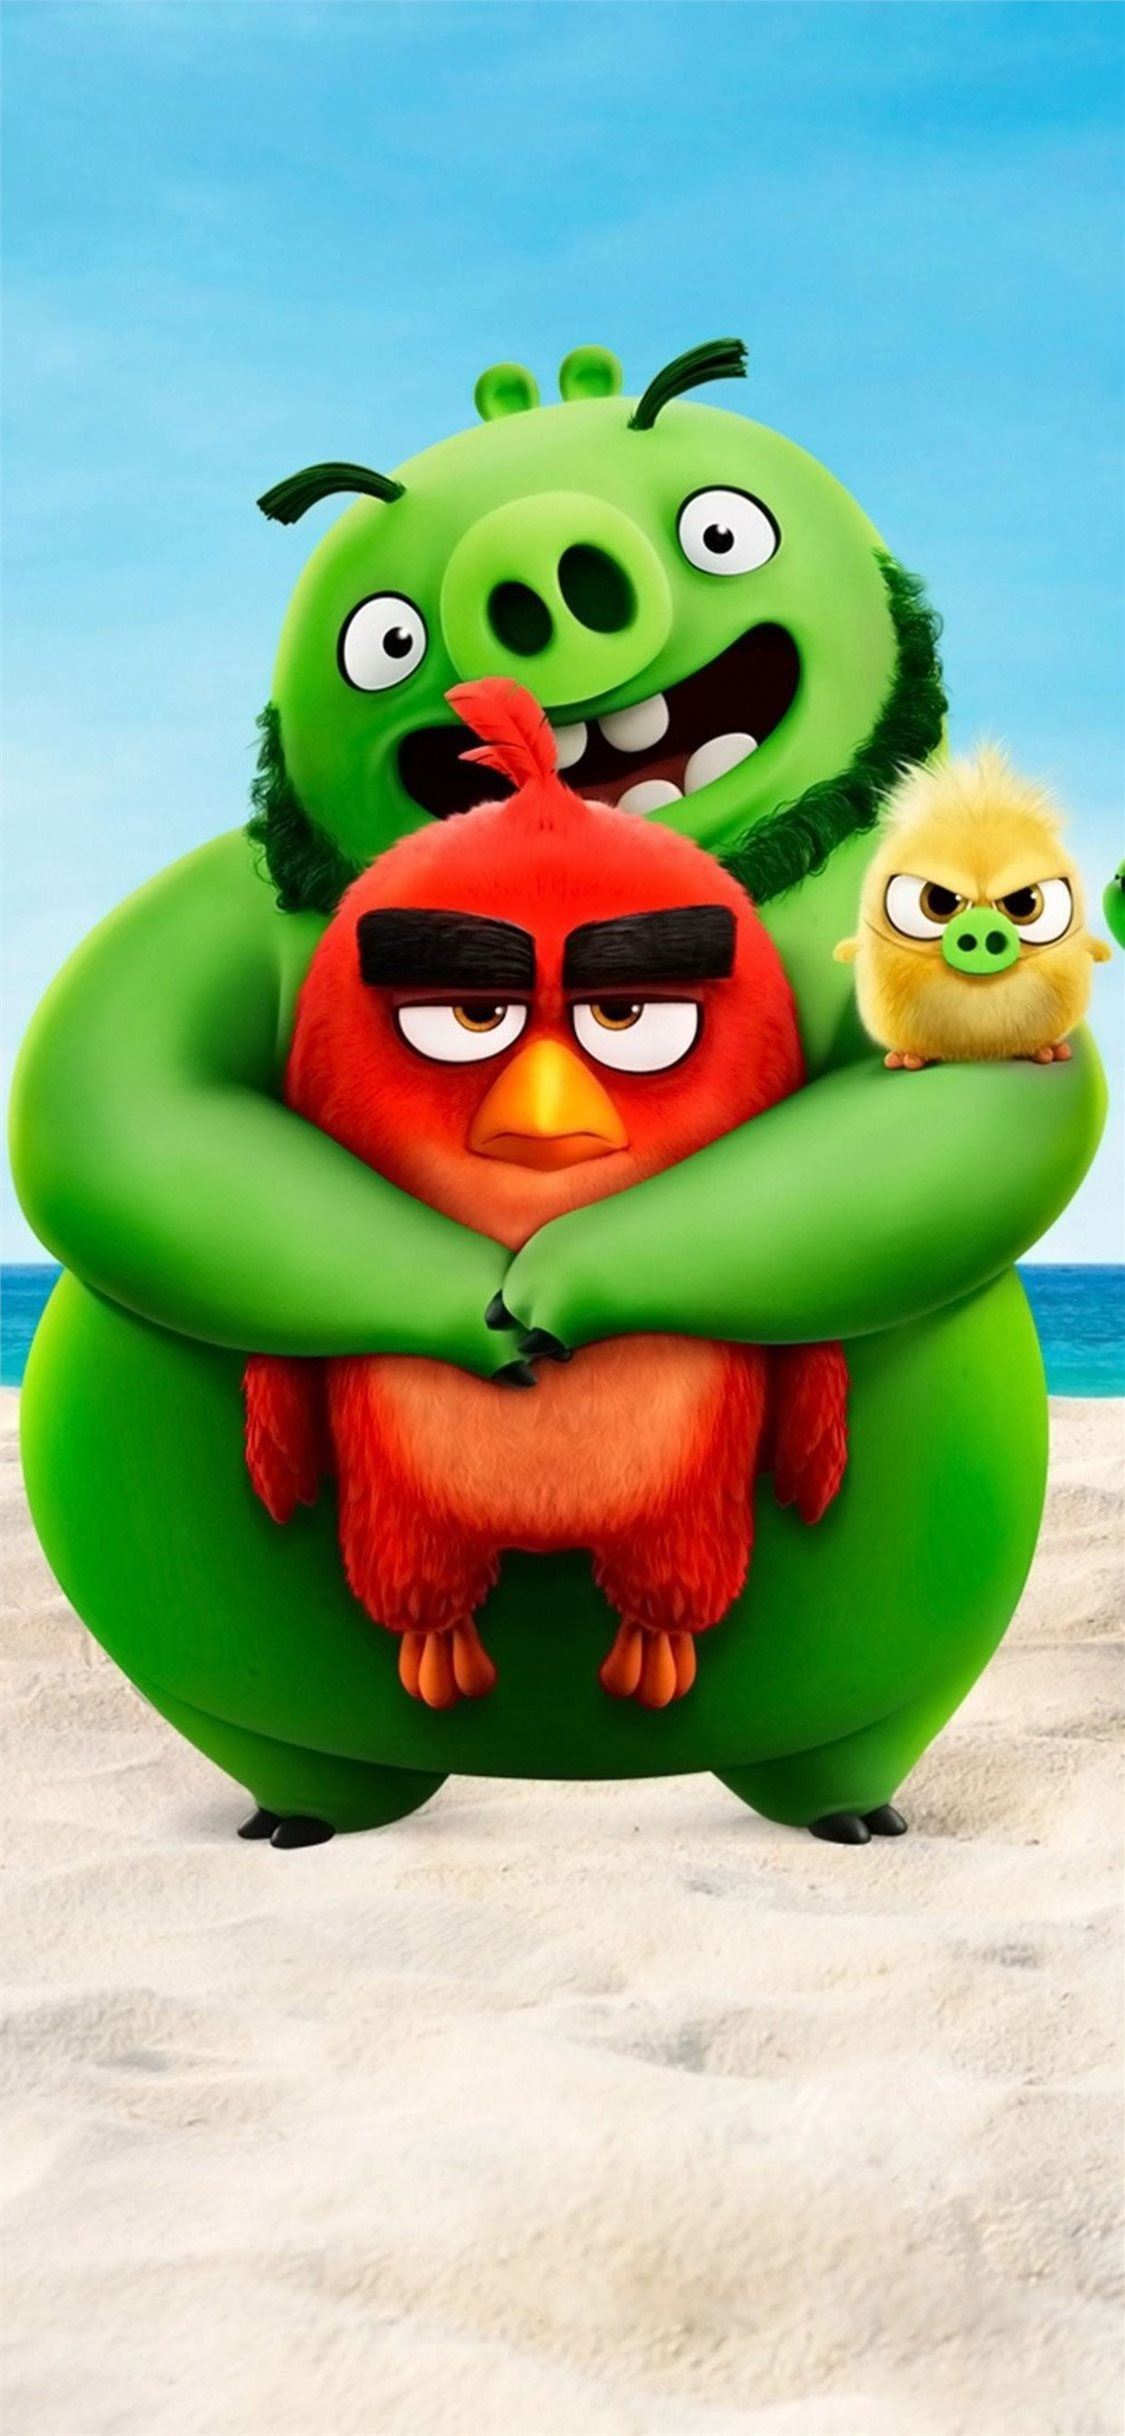 The Angry Birds Movie 2 19 4k Iphone Wallpapers Free Download